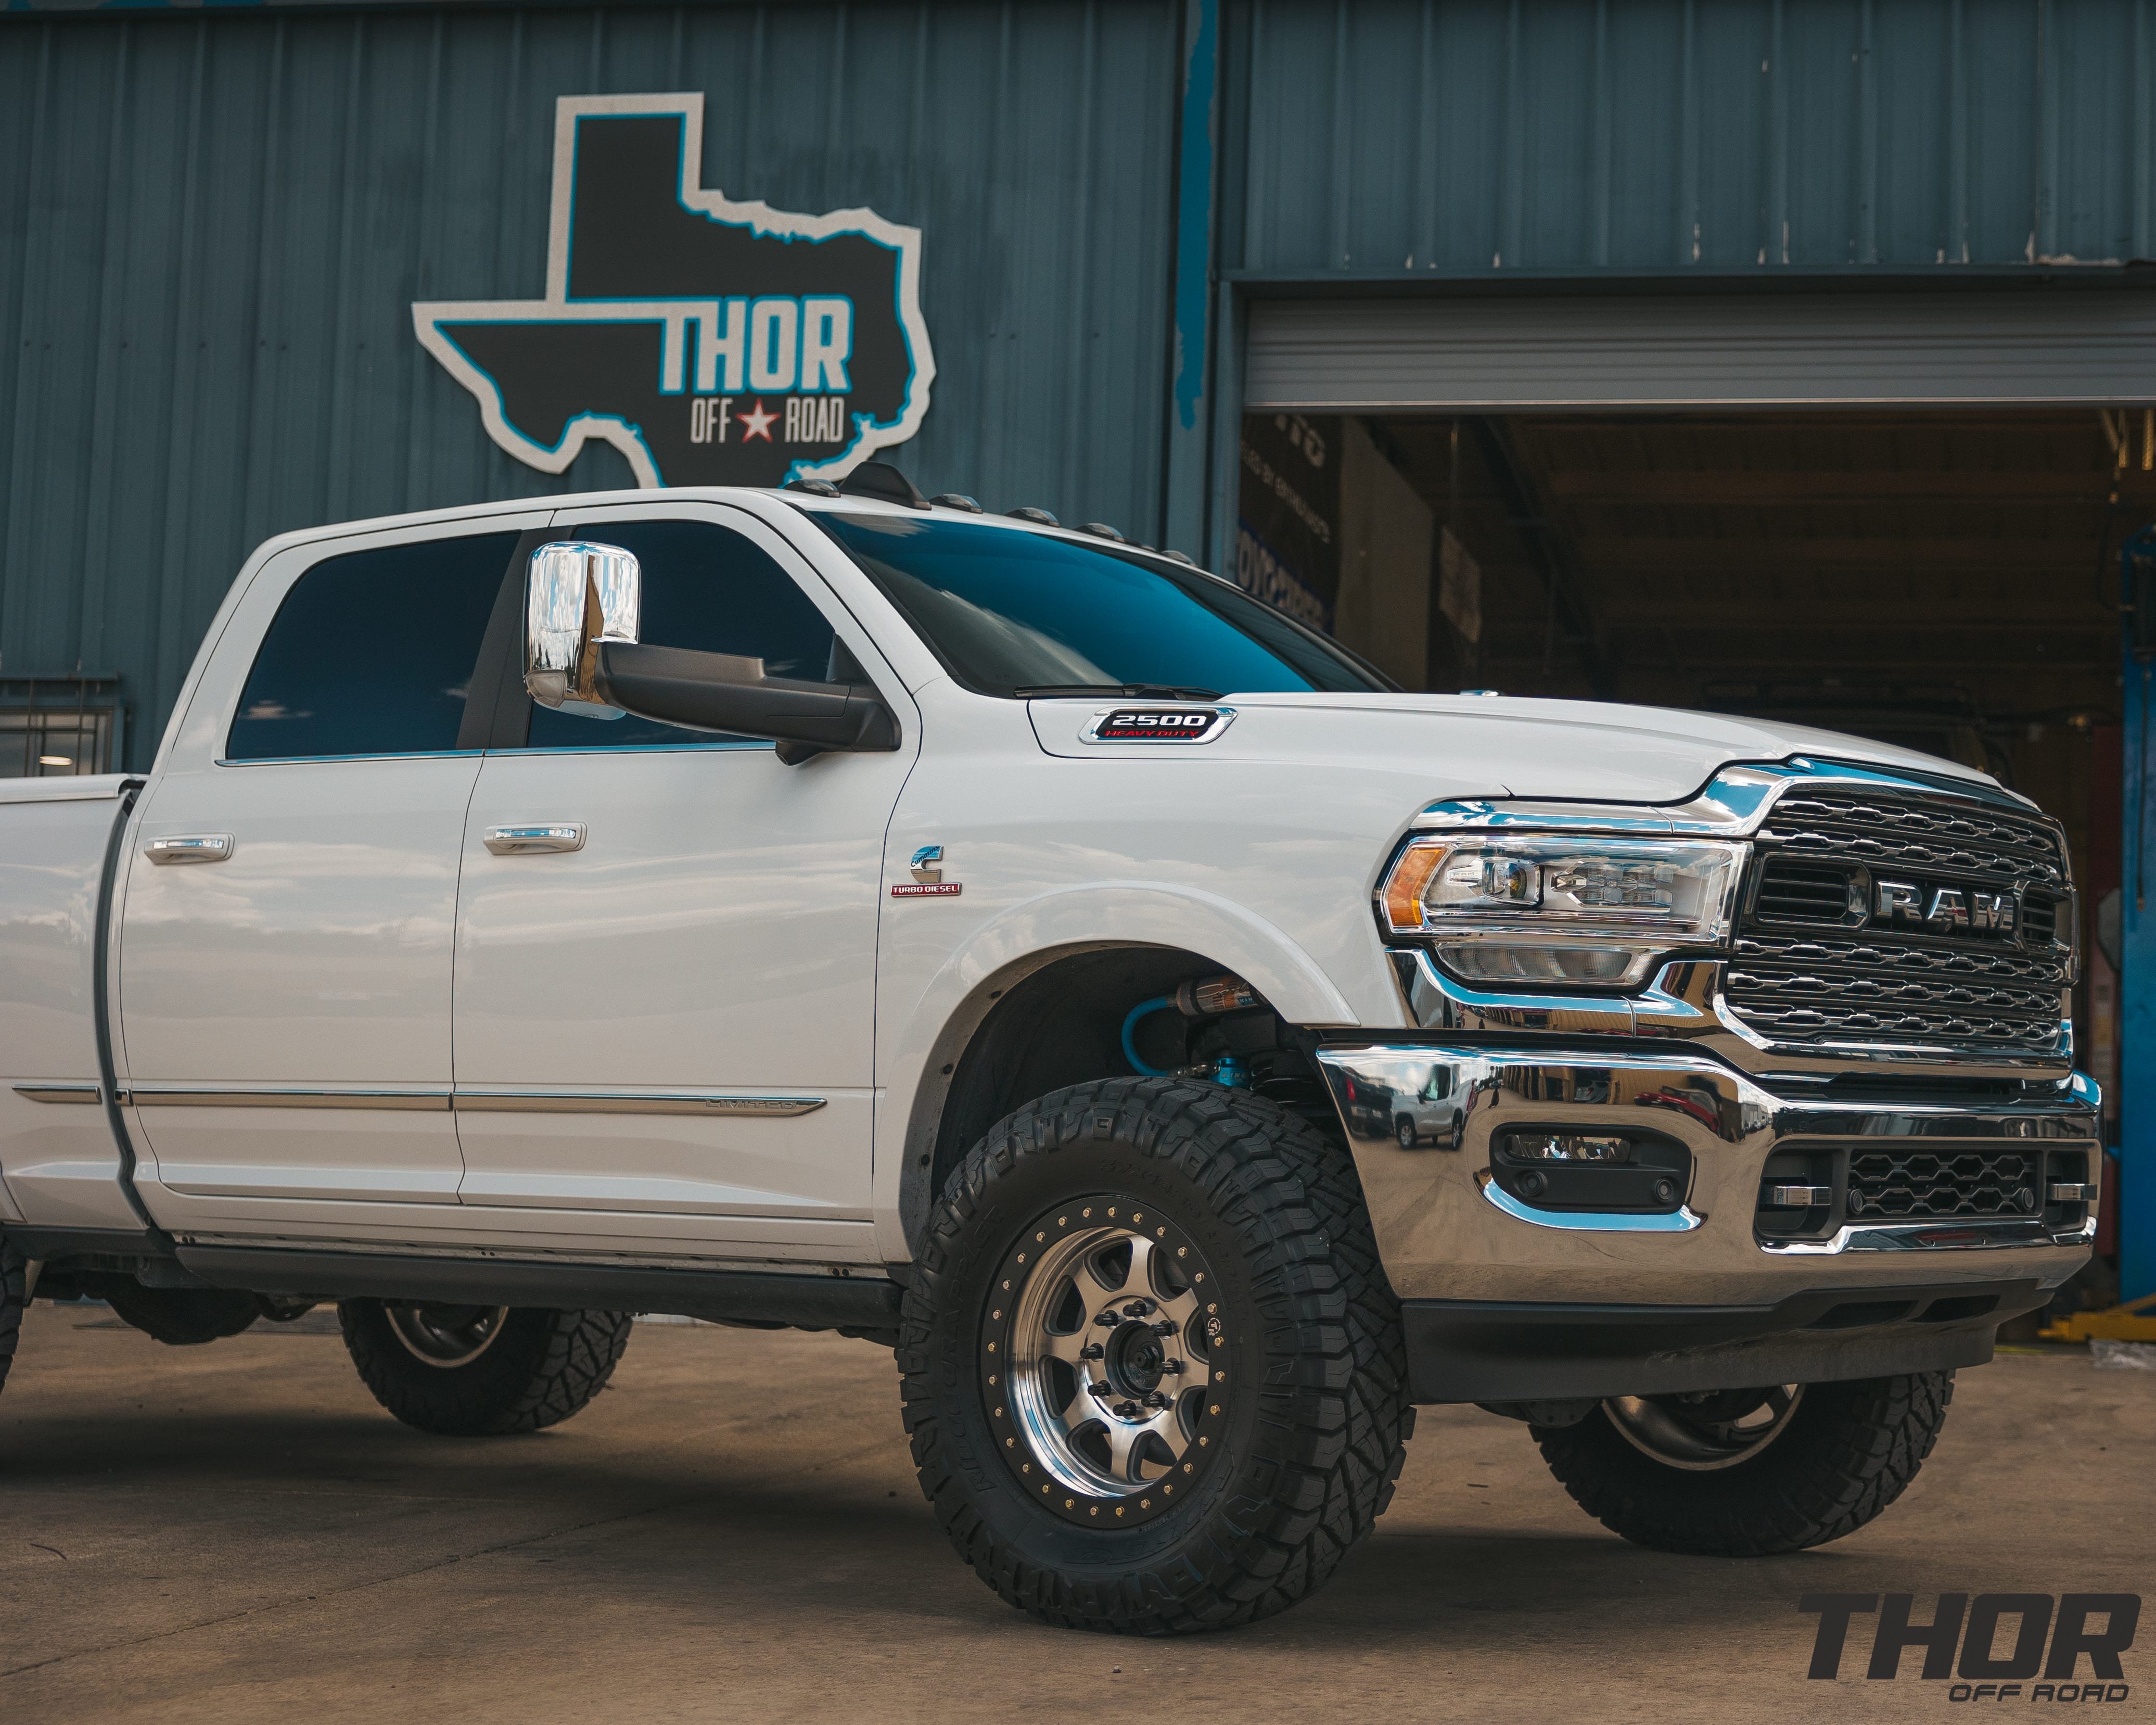 2021 RAM 2500 Limited in White with 3.25" Carli King Pintop Suspension, 37x12.50R18 Nitto Ridge Grappler Tires, 18" Trail Ready Machined Wheels with Black Rings